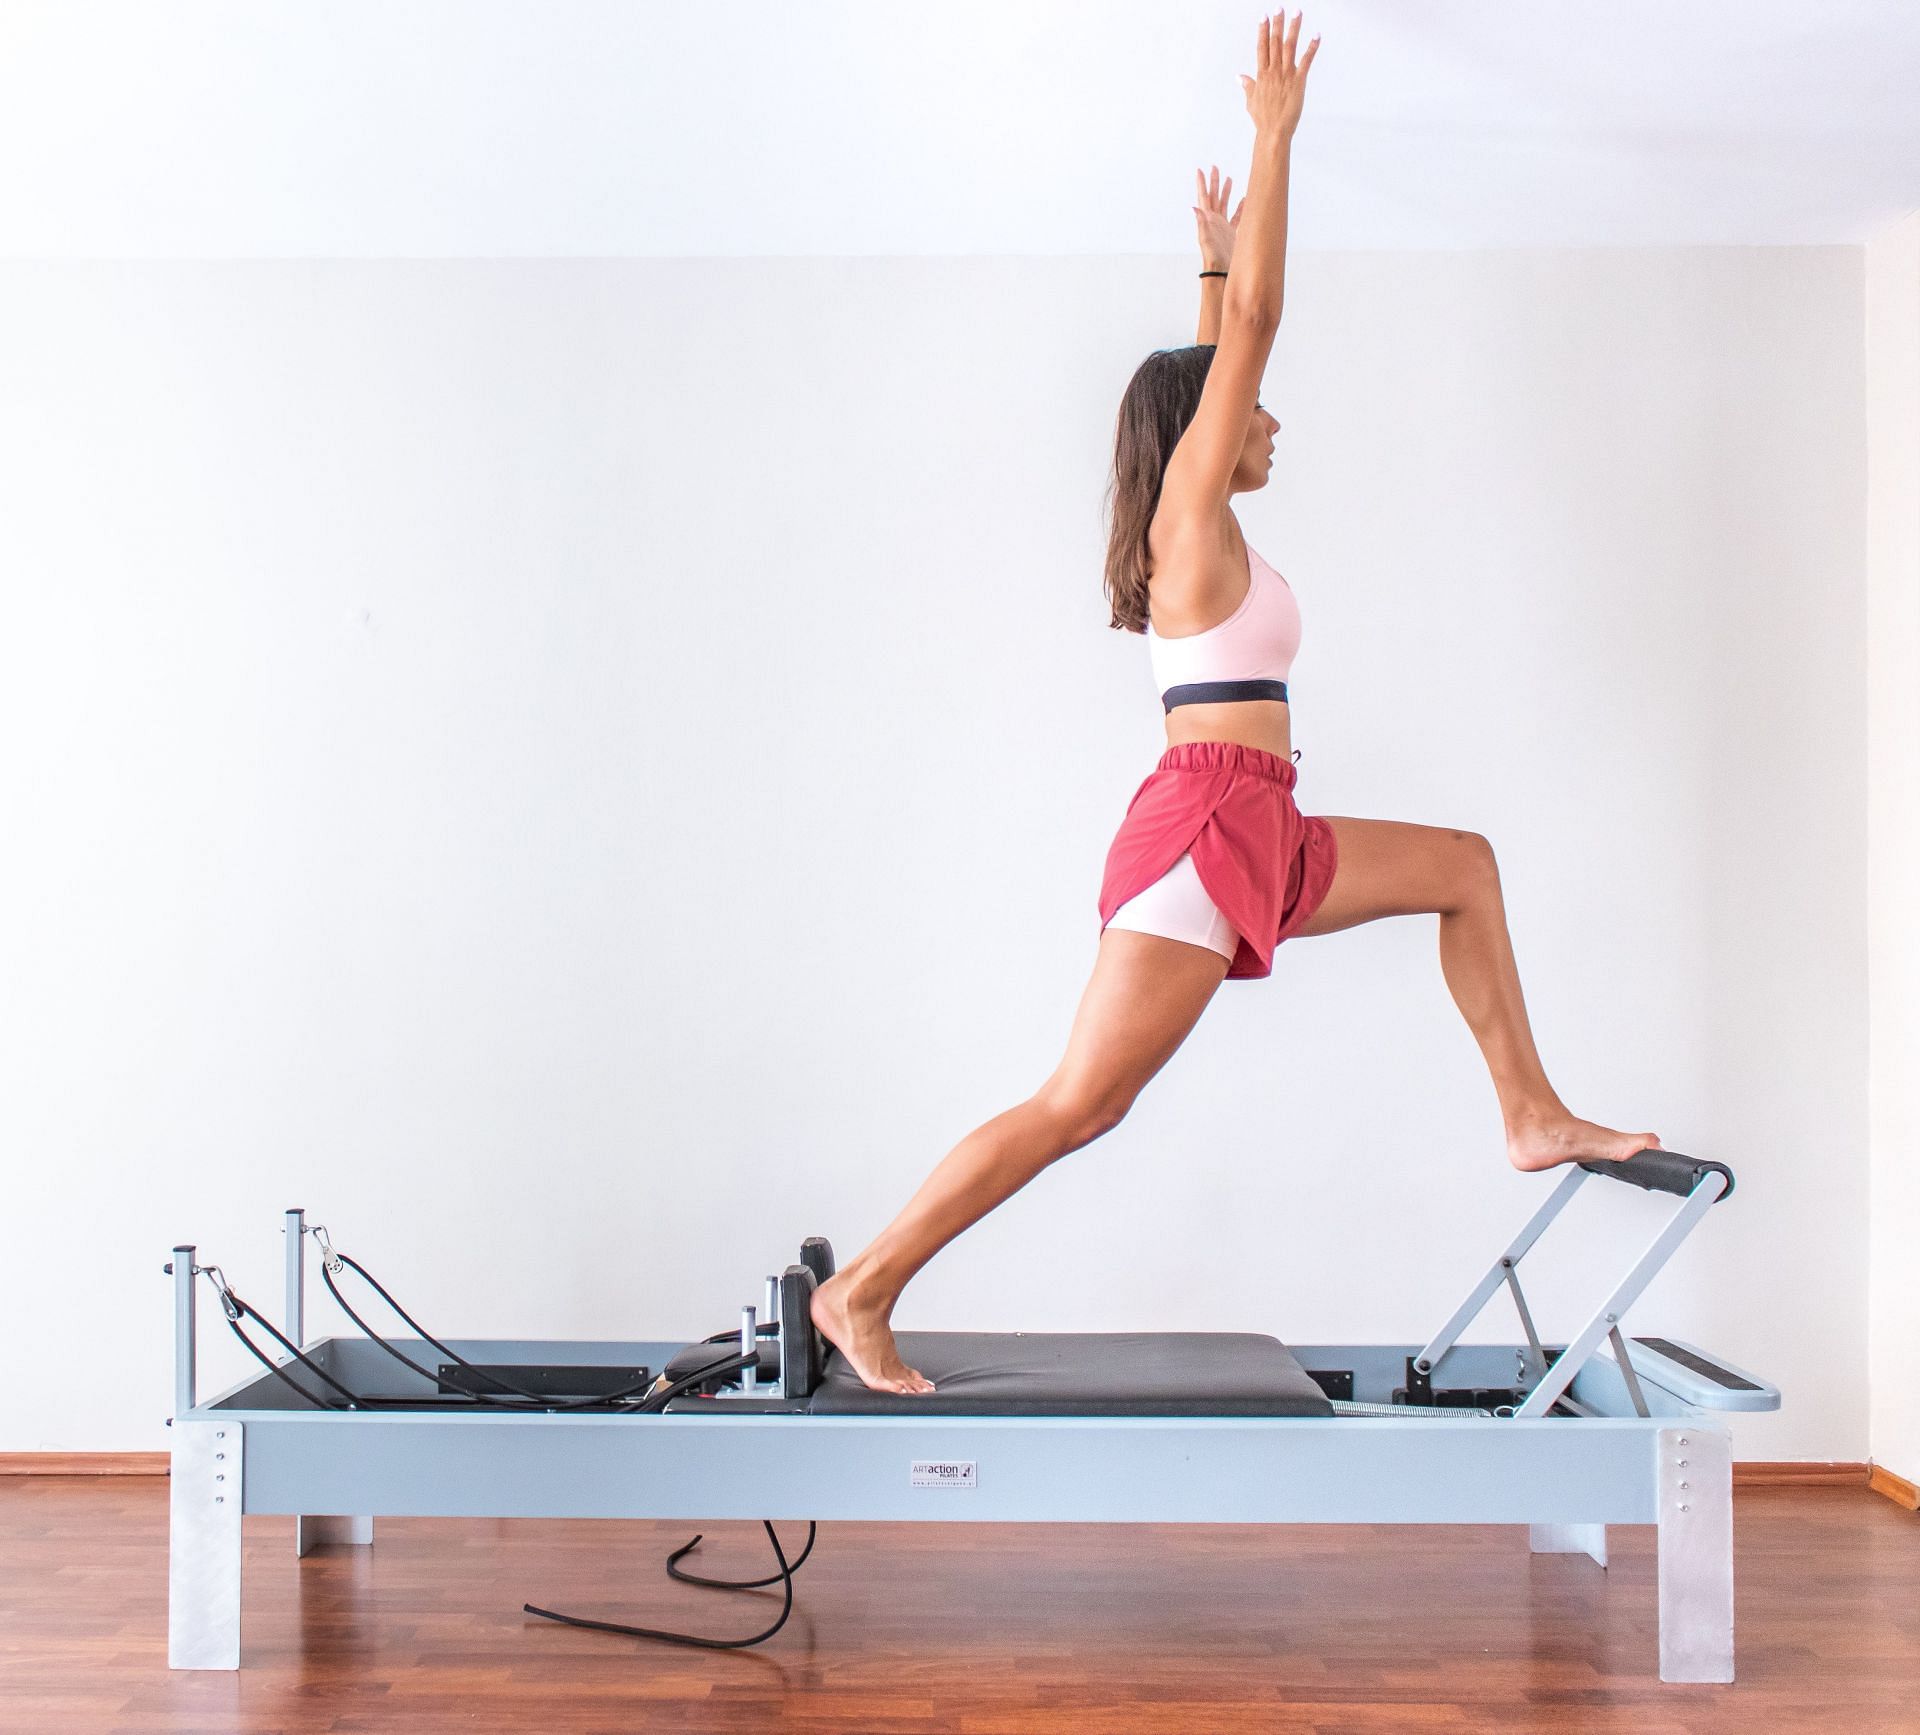 The reformer was invented by Joseph Pilates. (Image via Pexels/Maria Charizani)